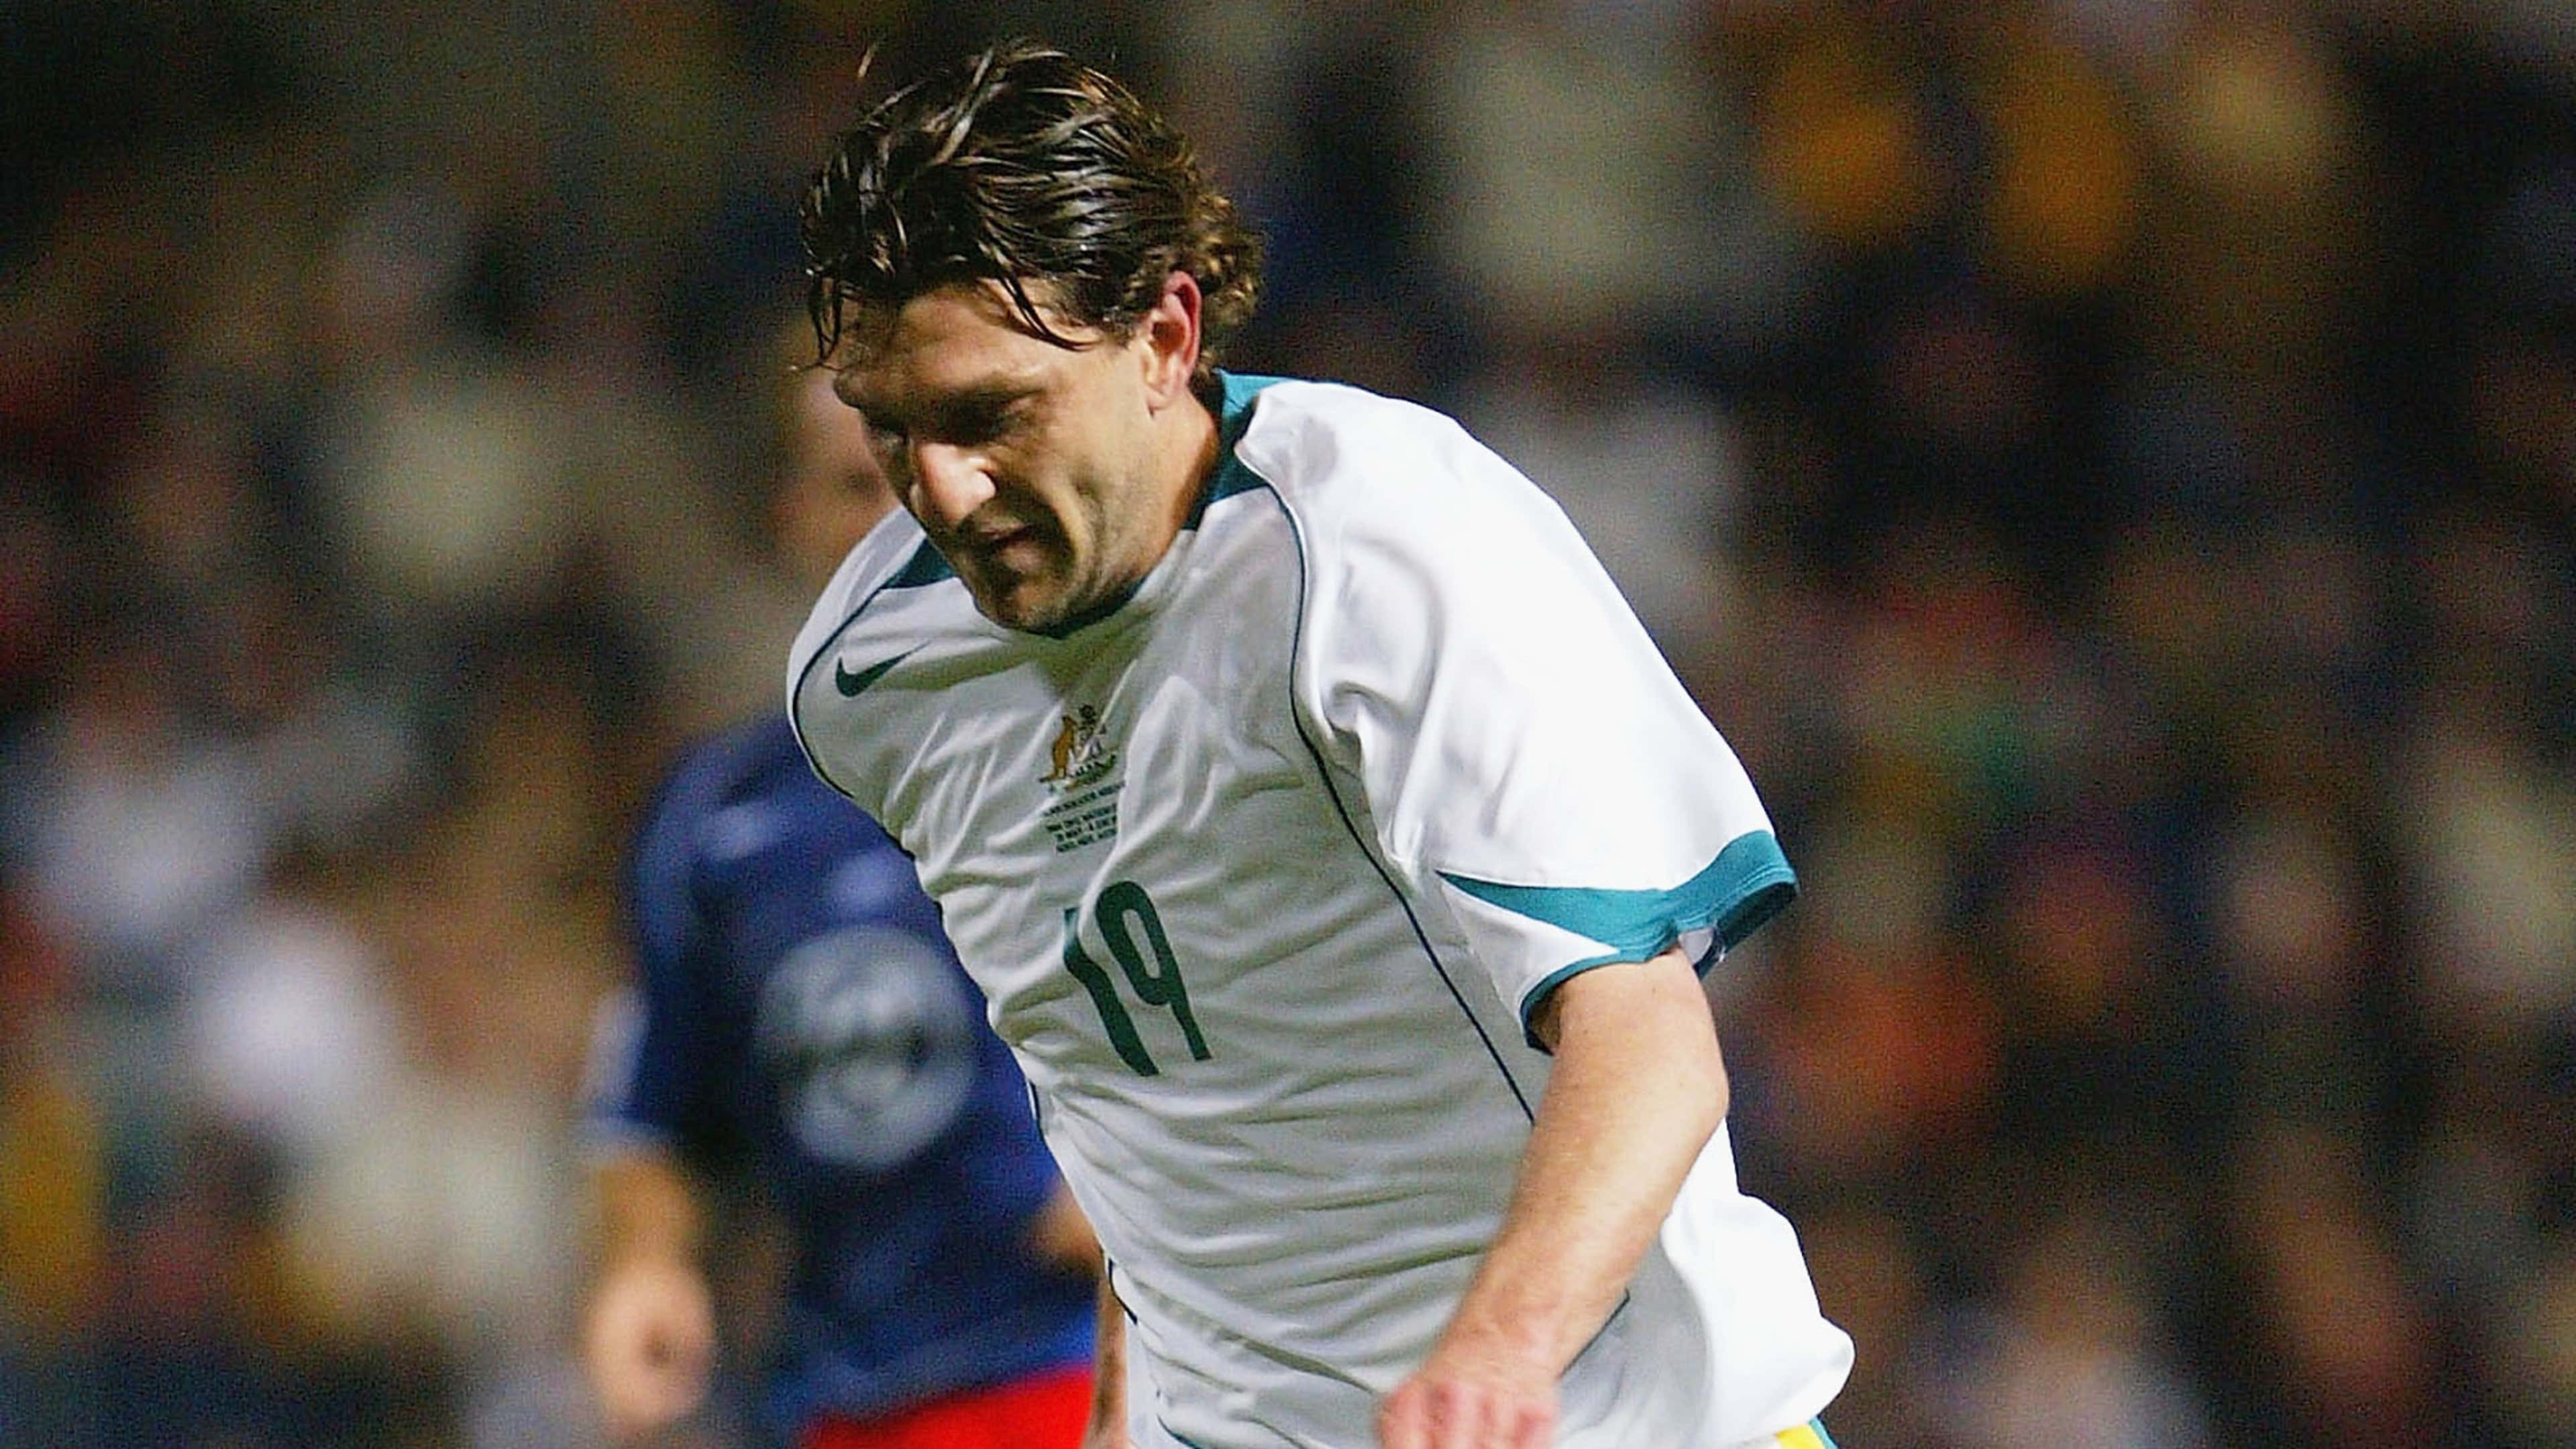 Max Vieri Australia New Zeland OFC Nations Cup 2004